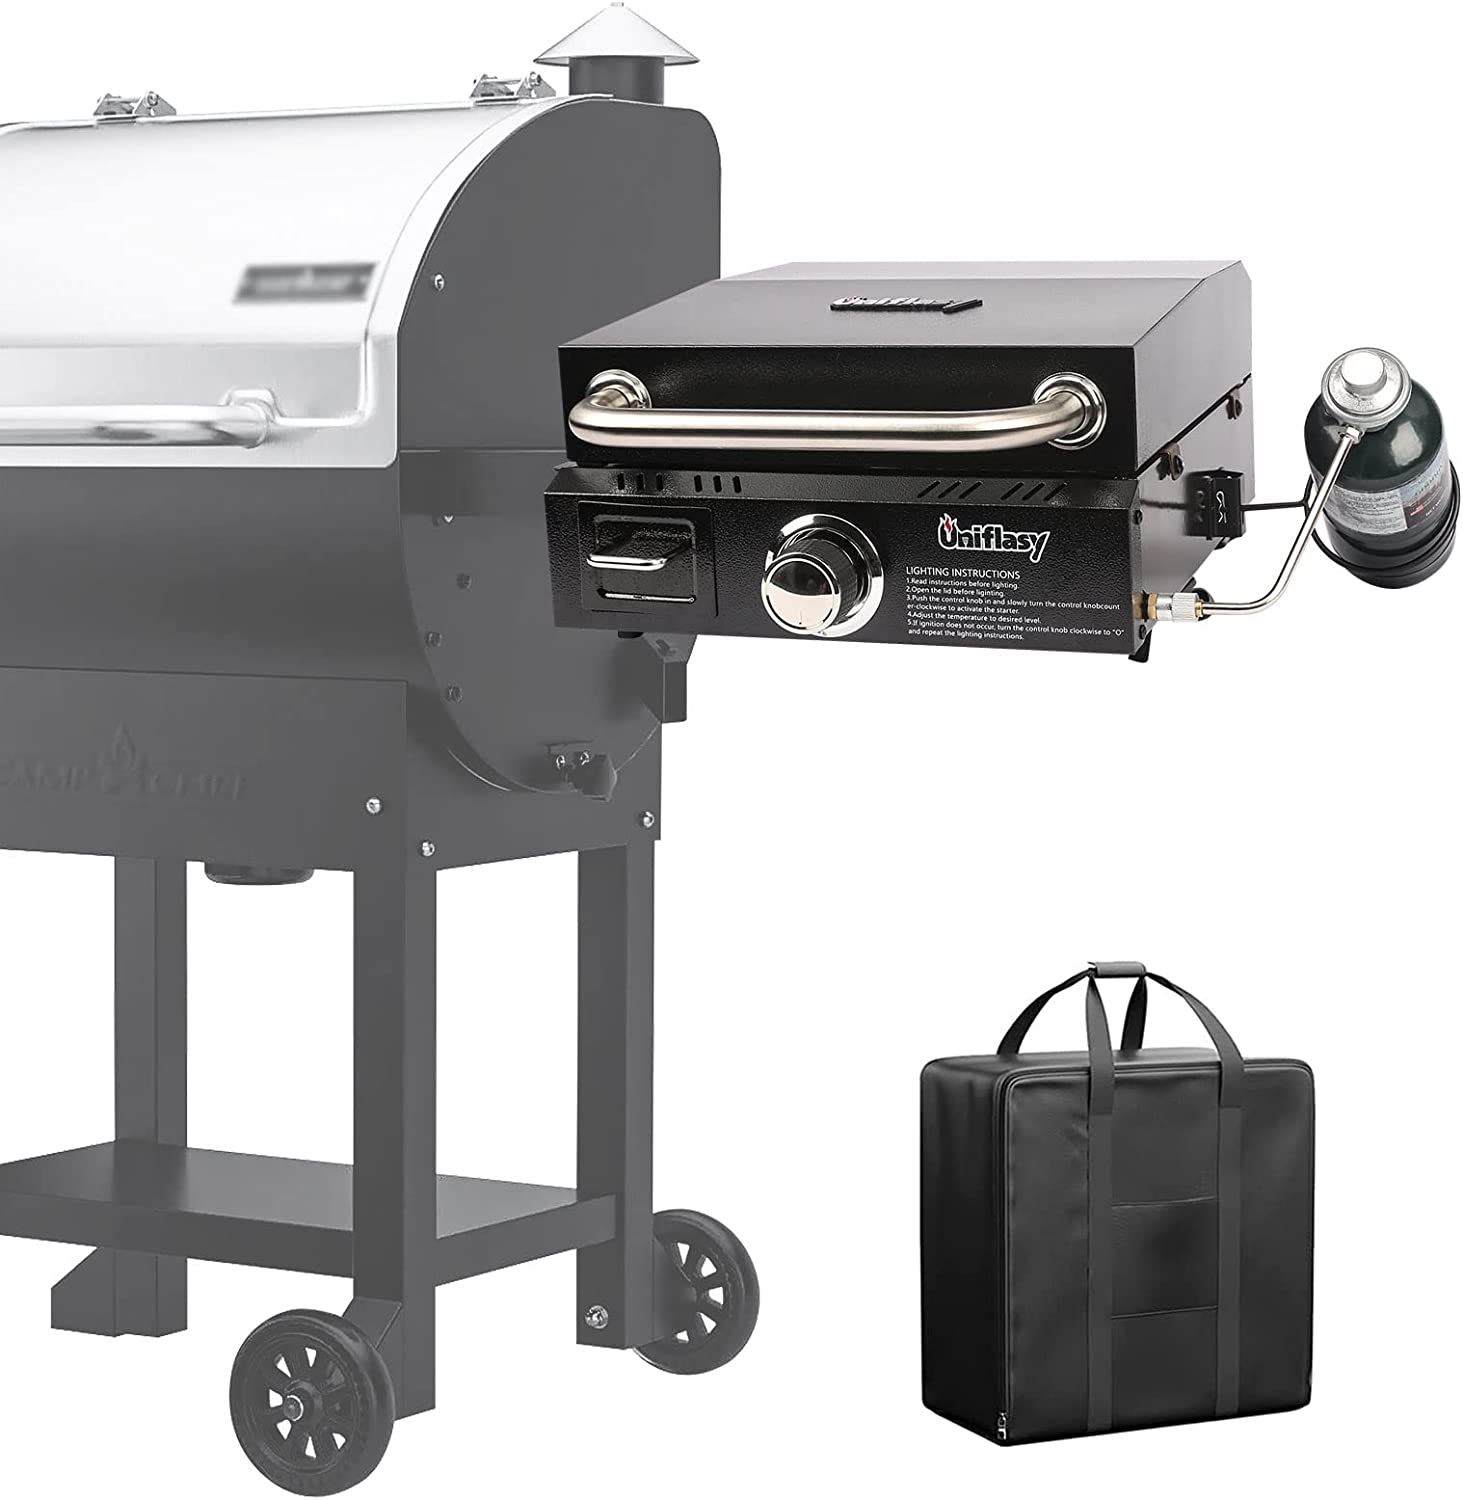 Camp Chef Woodwind SS 24 Pellet Grill With Propane Sidekick Sear